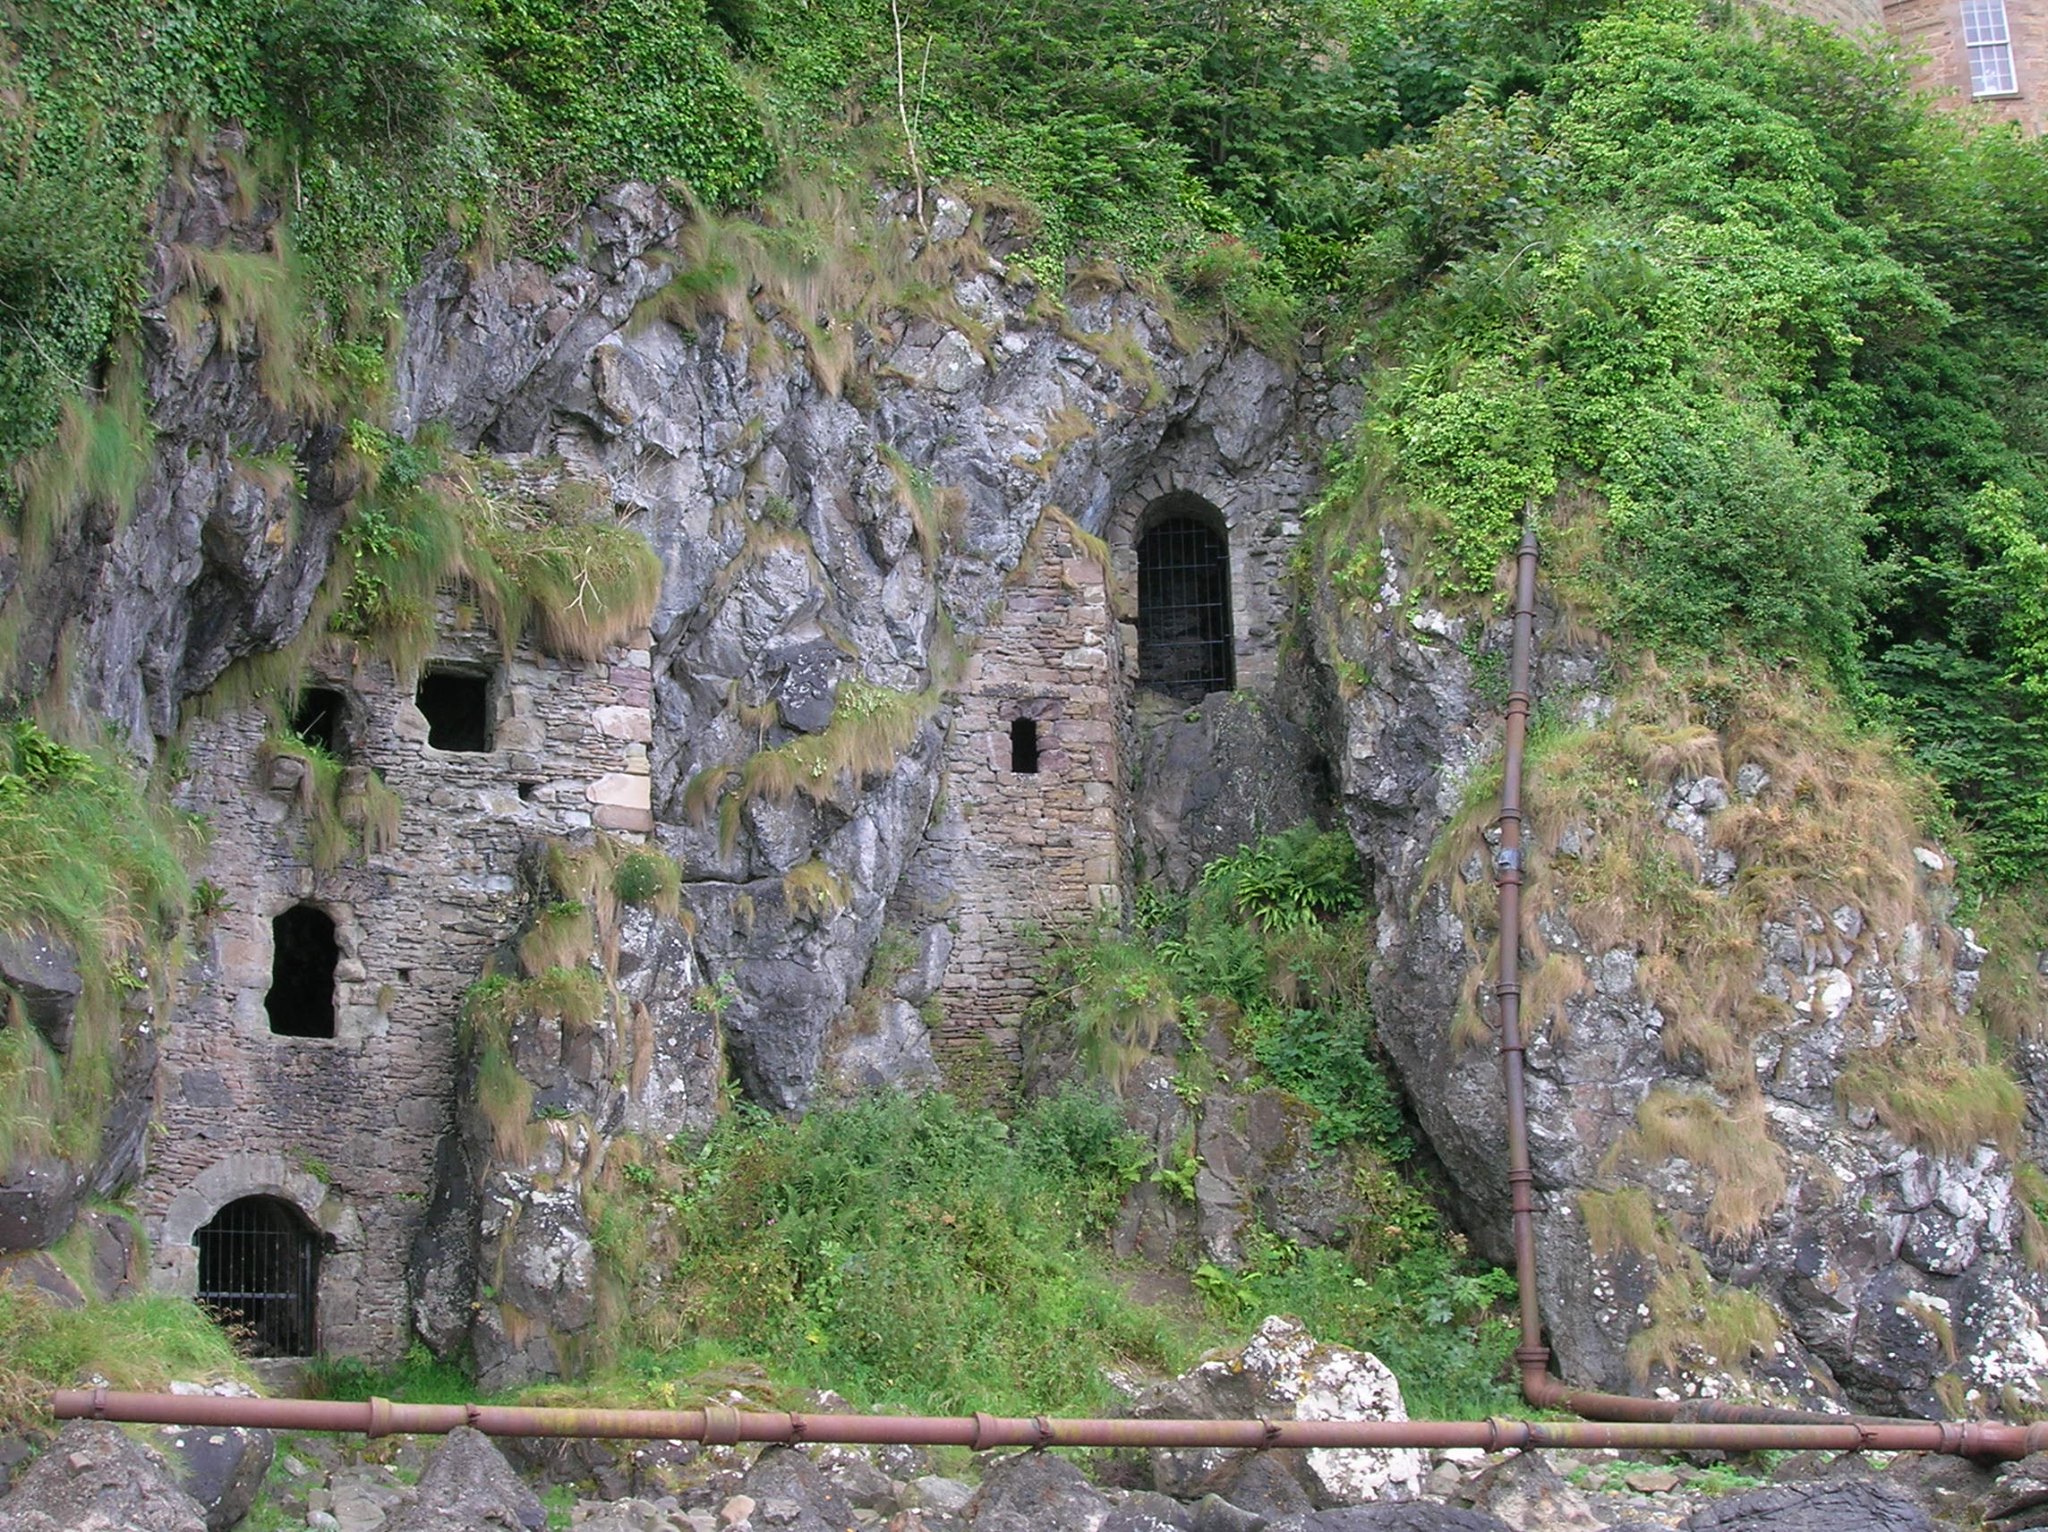 The caves beneath Culzean Castle have been used by humans since the Iron Age.